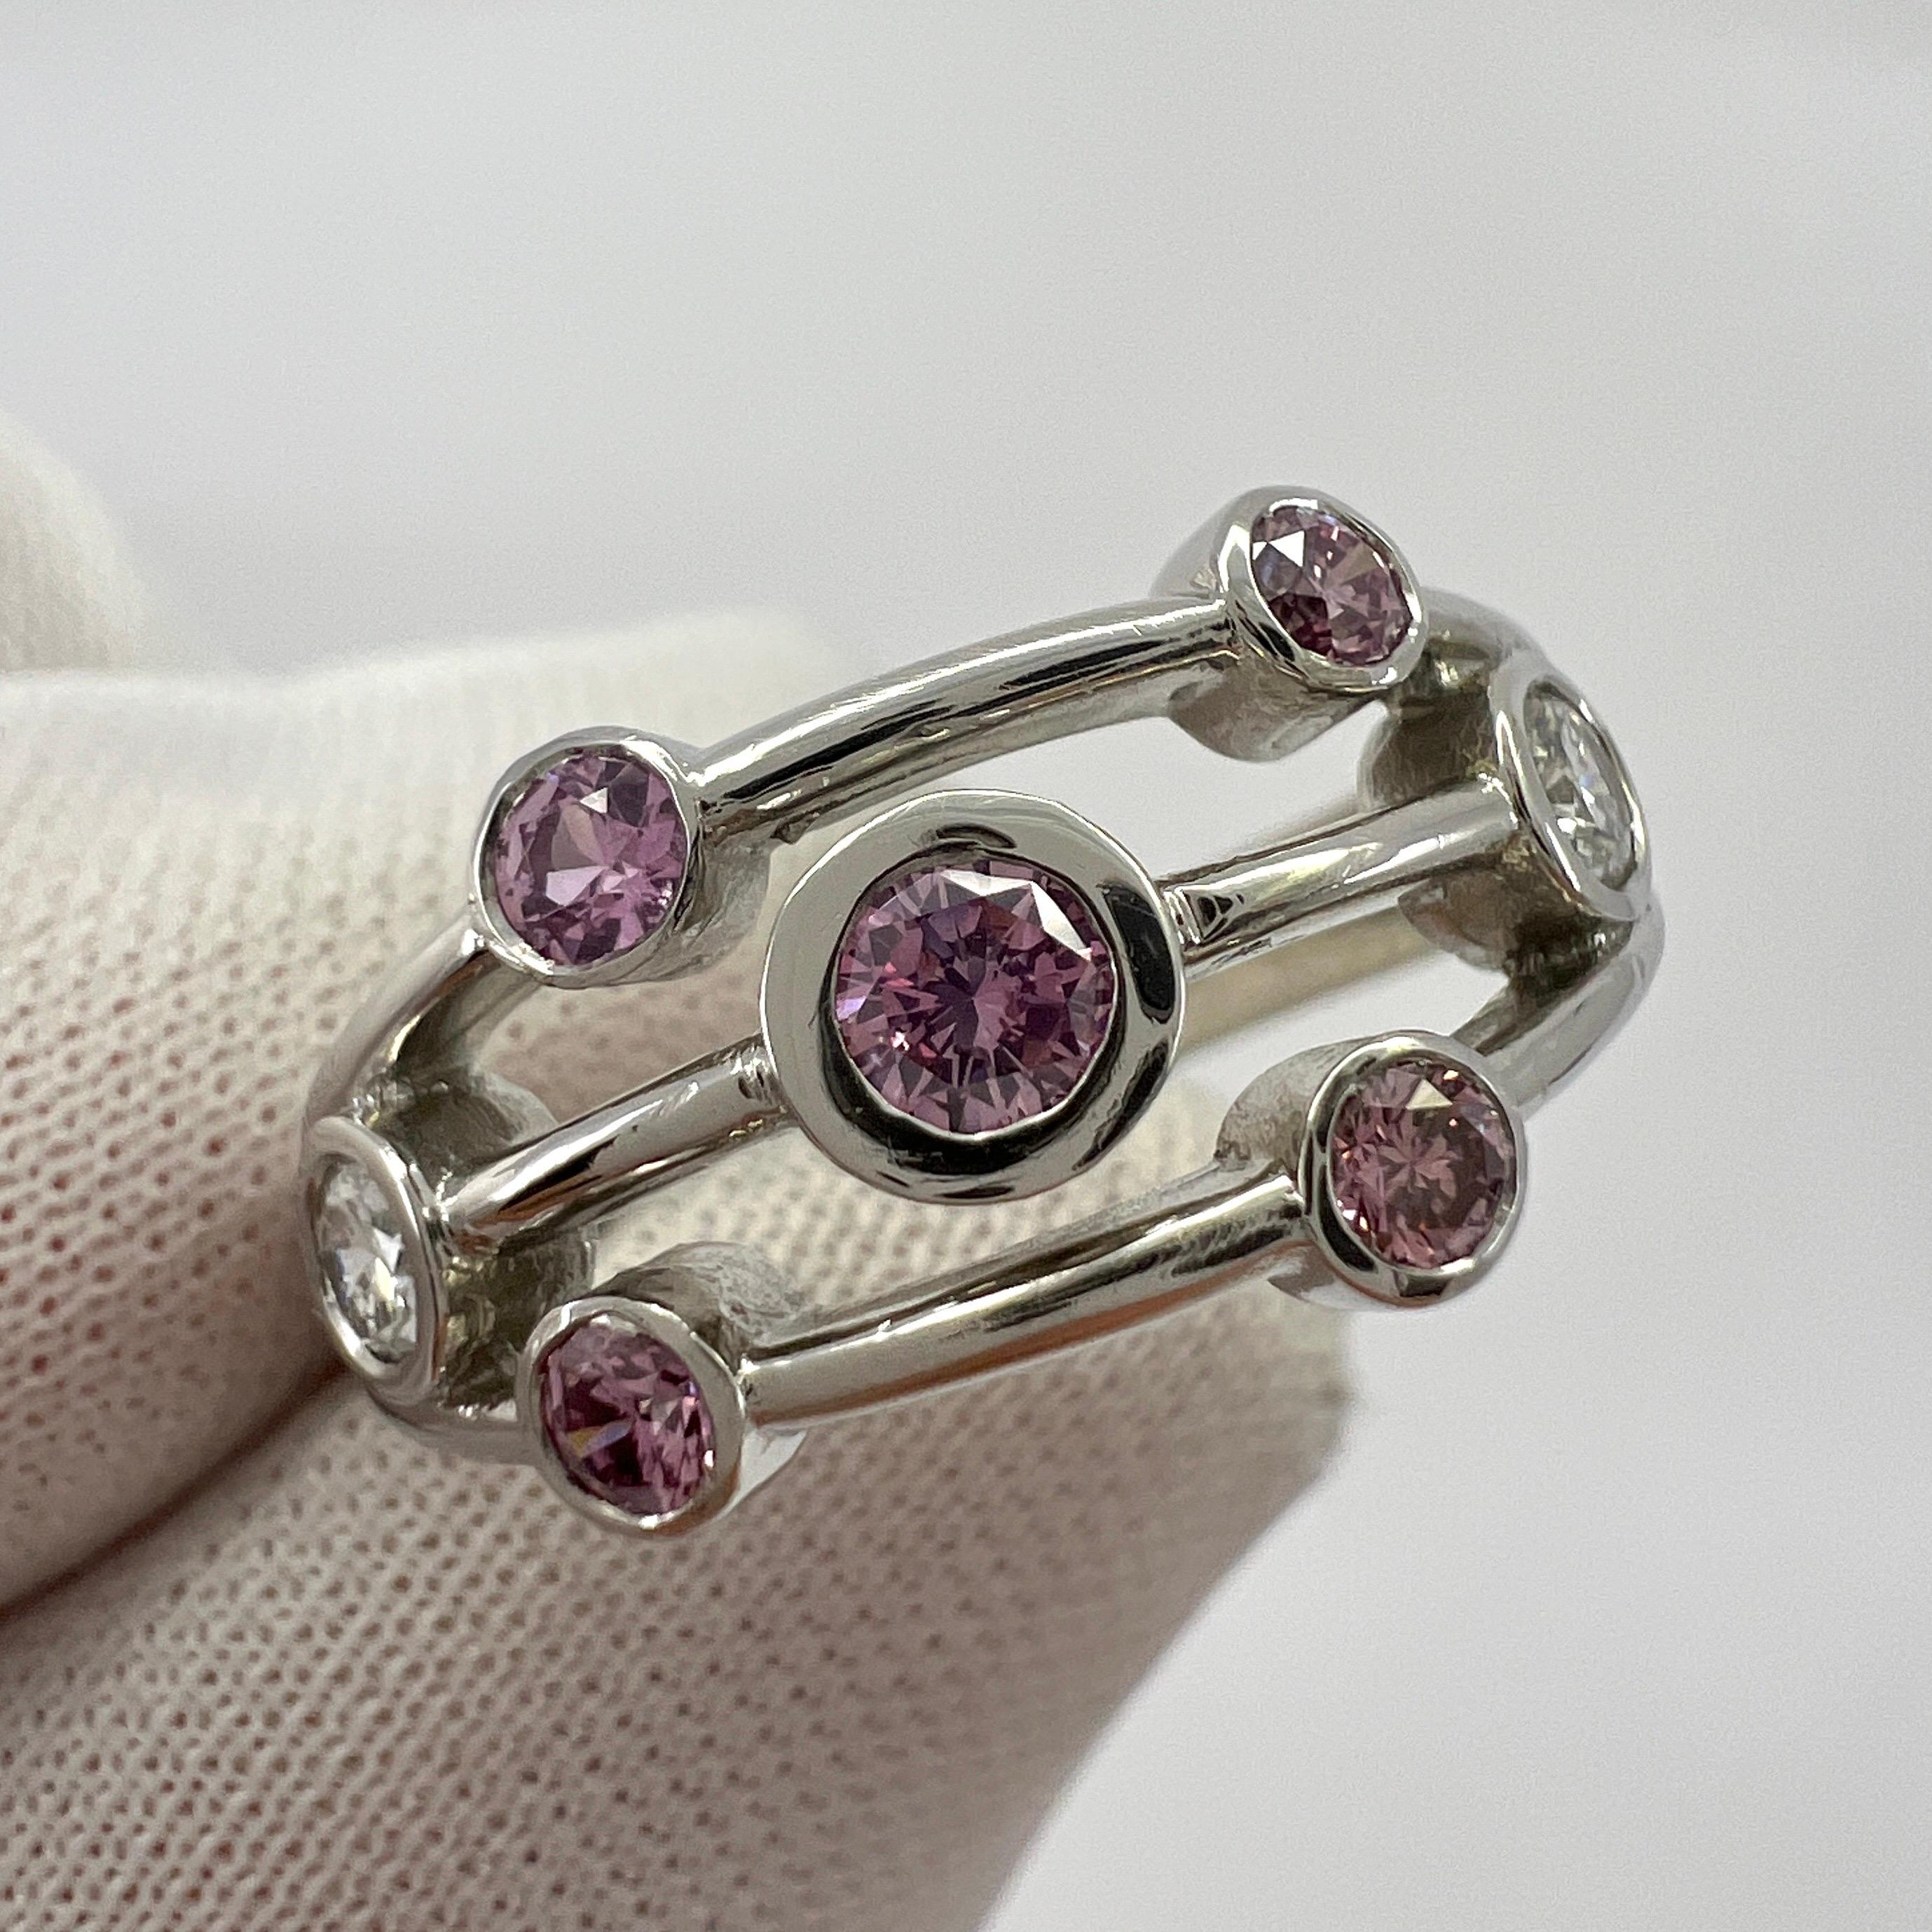 Fine And Rare Untreated Natural Fancy Pink And White Diamond 18k White Gold Raindance Bubble Ring.

A beautiful handmade 18k white gold ring set with 5 round brilliant cut natural fancy pink diamonds and 2 round brilliant cut natural white diamonds.